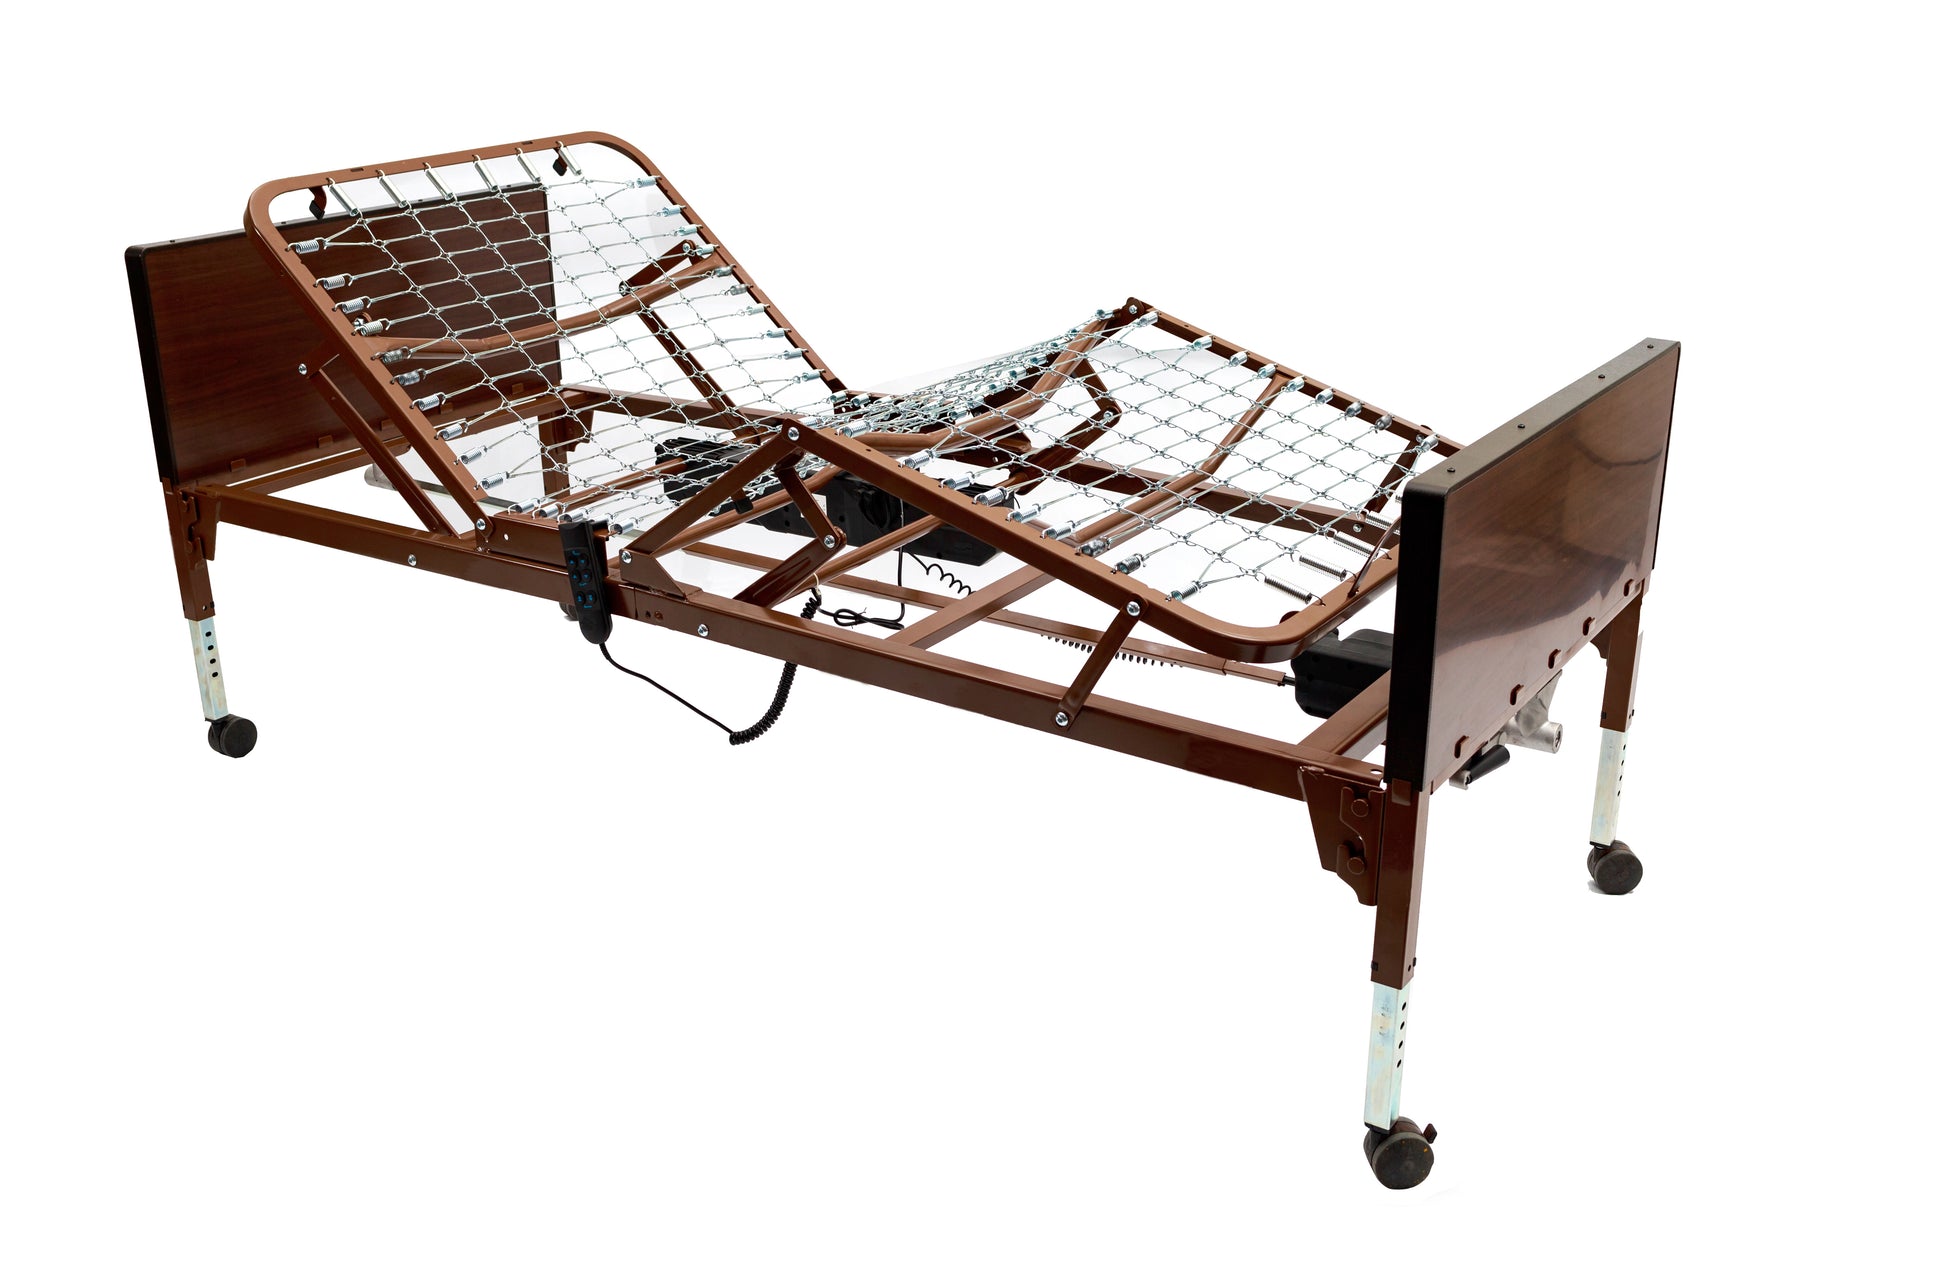 Front view of Invaacare's item number 5410IVC, brown, full-electric, hospital-style bed with no mattress against a white background.